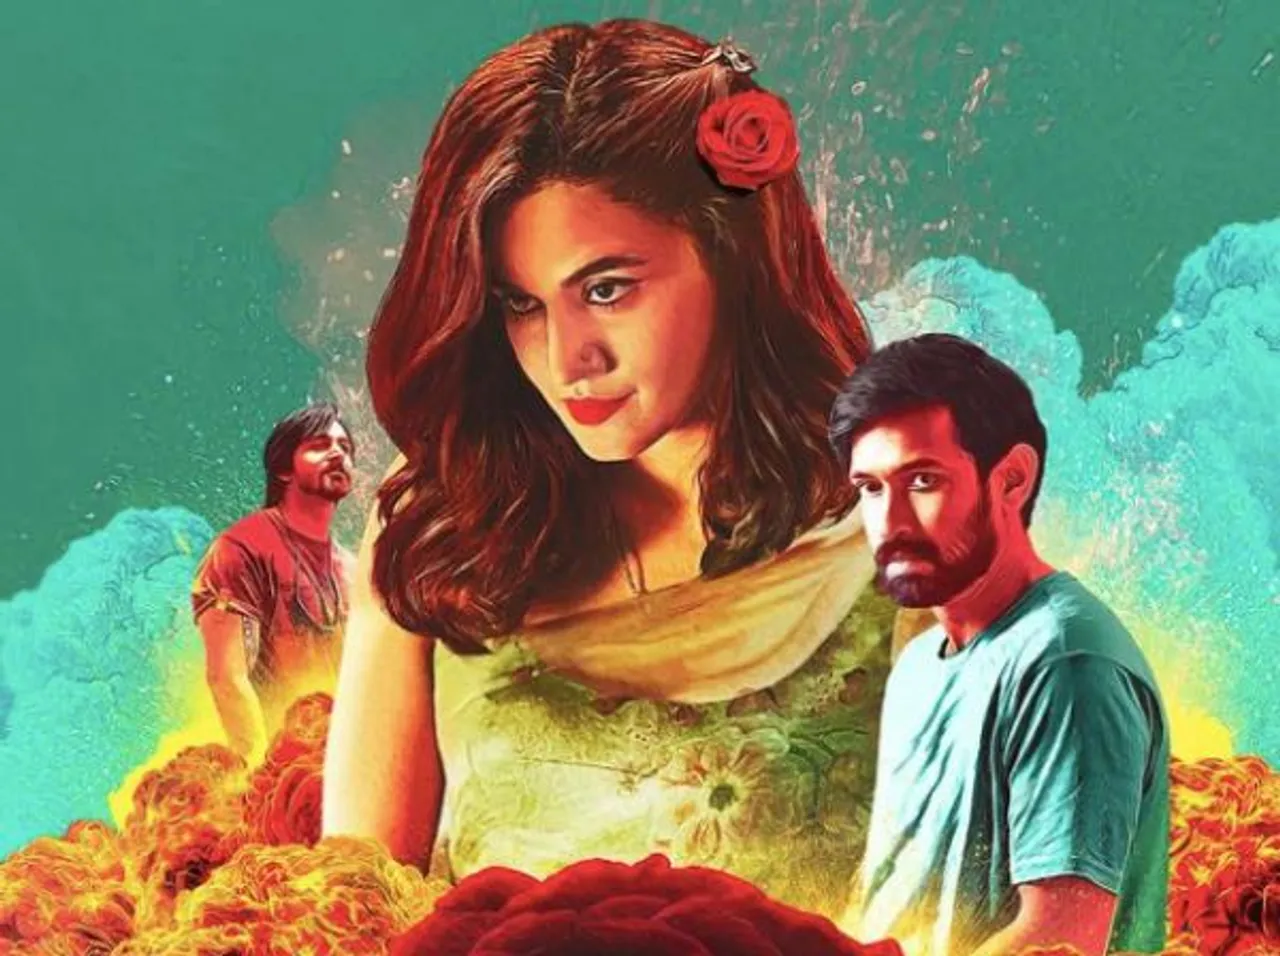 Haseen Dillruba Poster Out: Taapsee Pannu and Vikrant Massey’s Play to Edgy Script